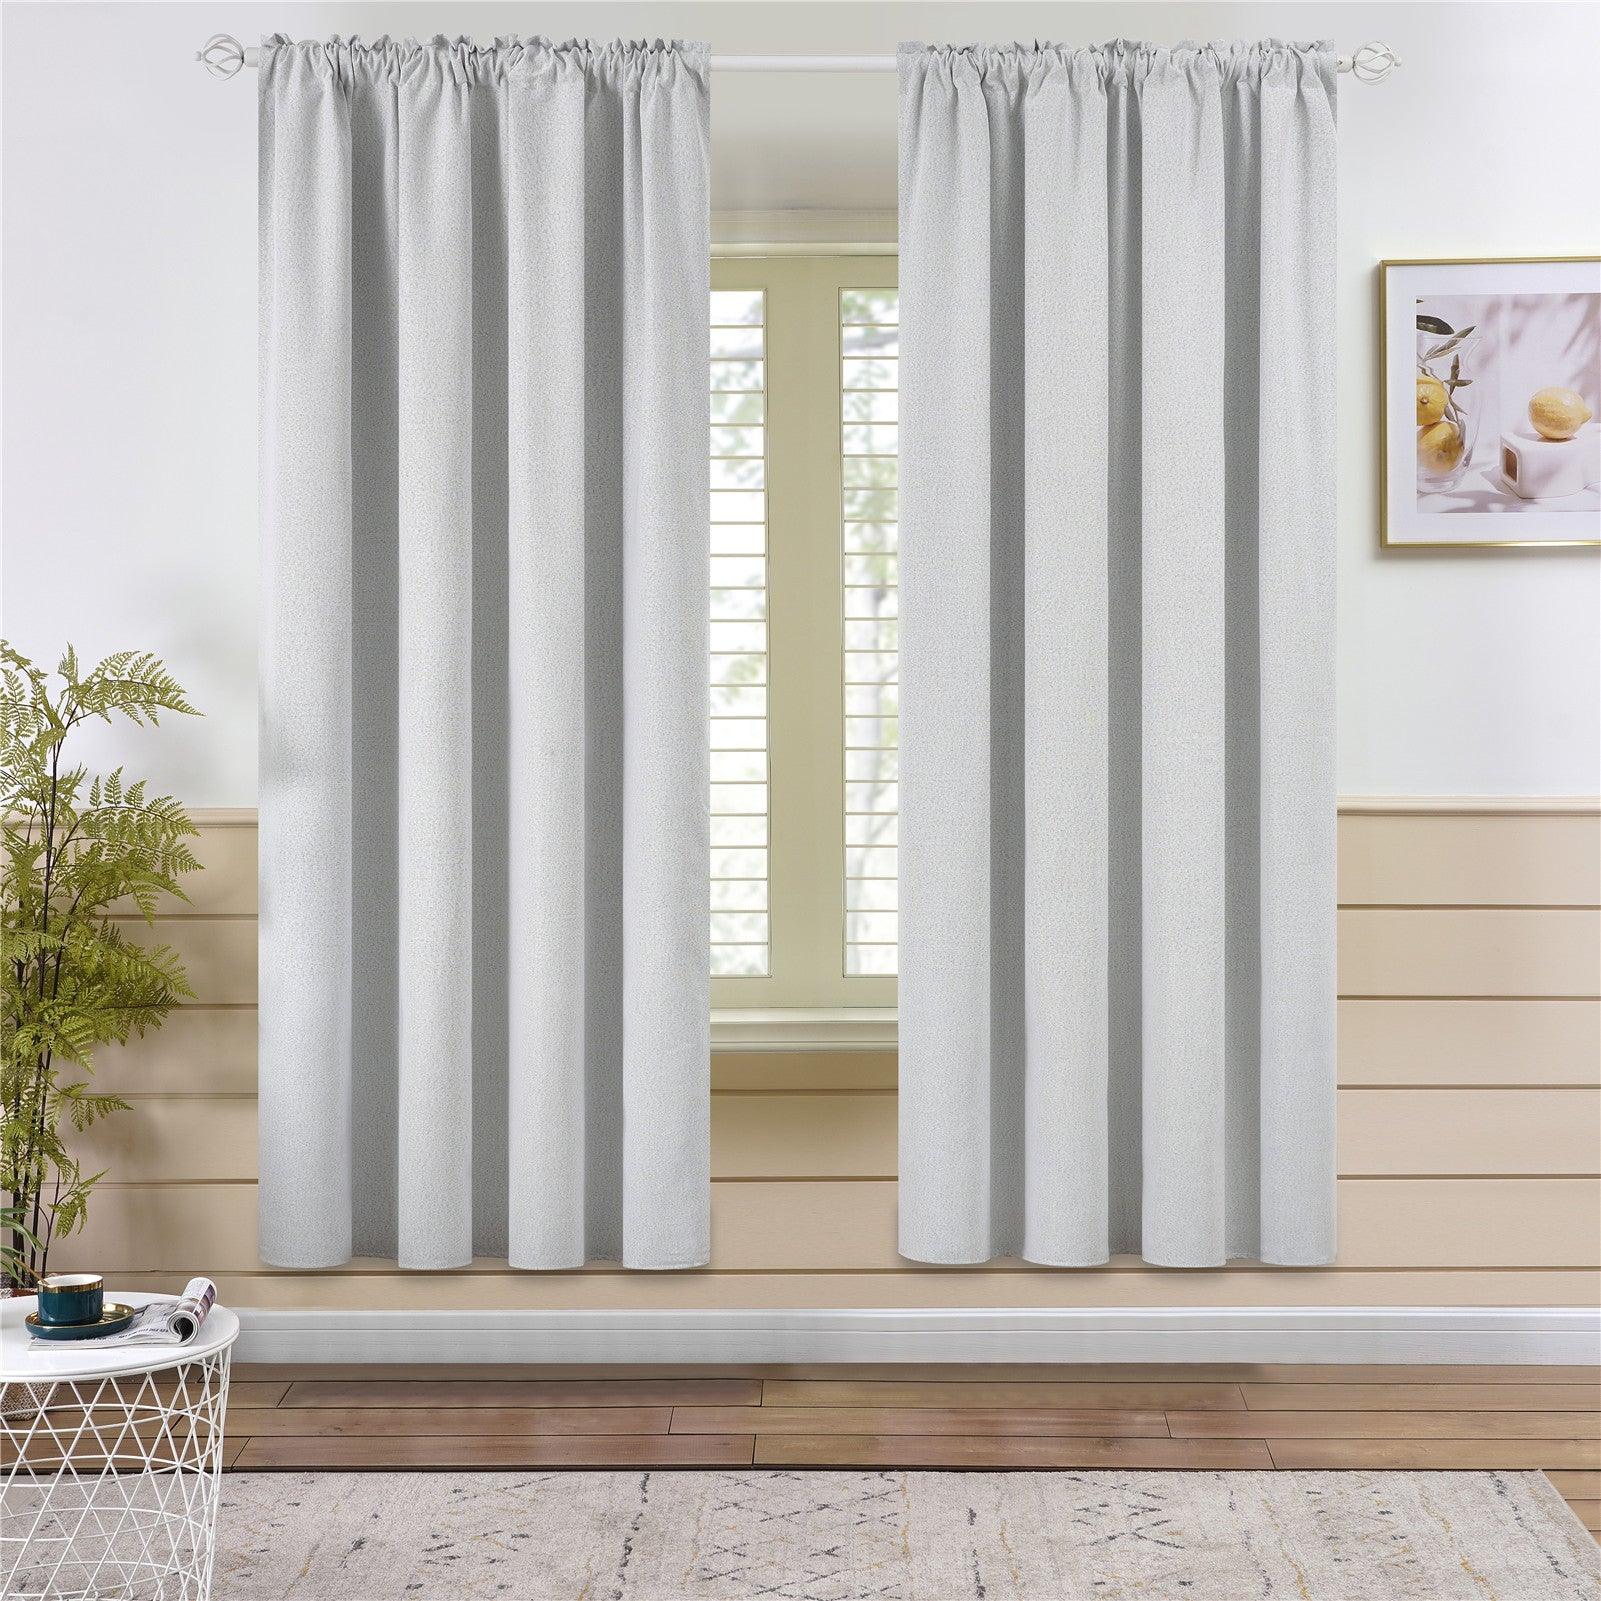 Custom Curtain Recommendation  -Faux Linen 100% Blackout Insulating Curtains Suit Baby Night Shift Worker For Bedroom,Living Room,1 Panel - Topfinel